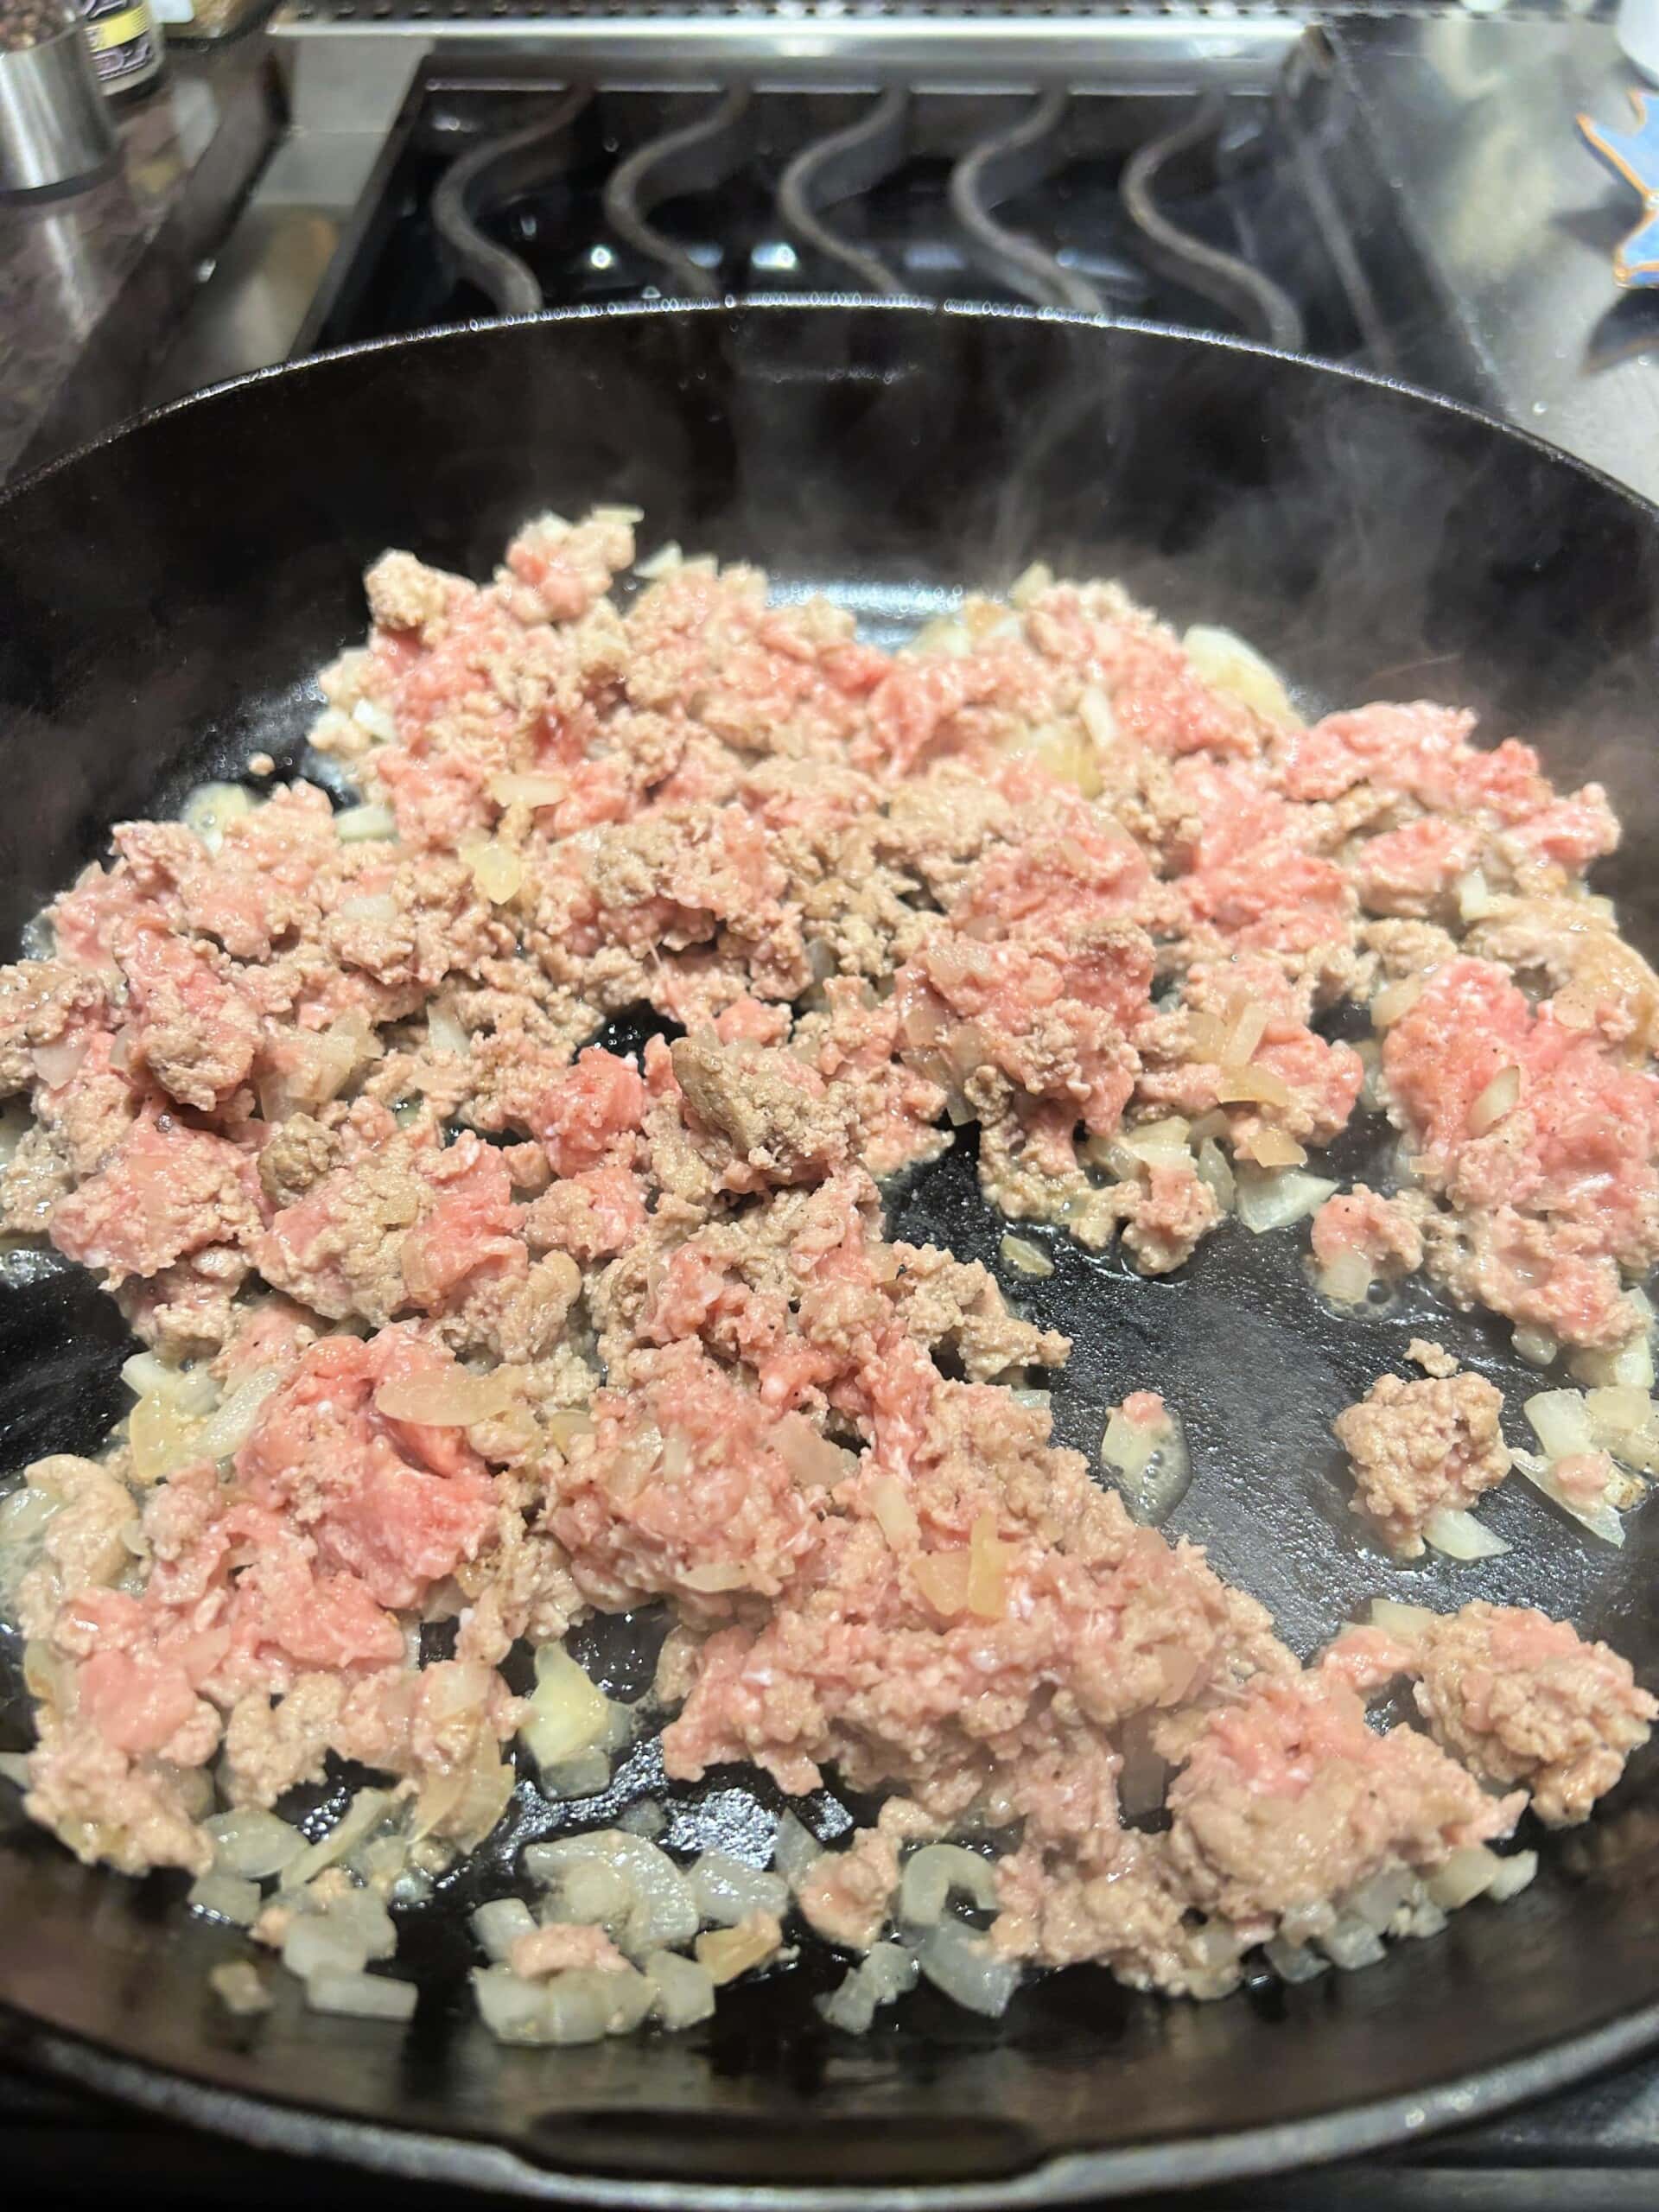 Ground Turkey being cooked in a skillet